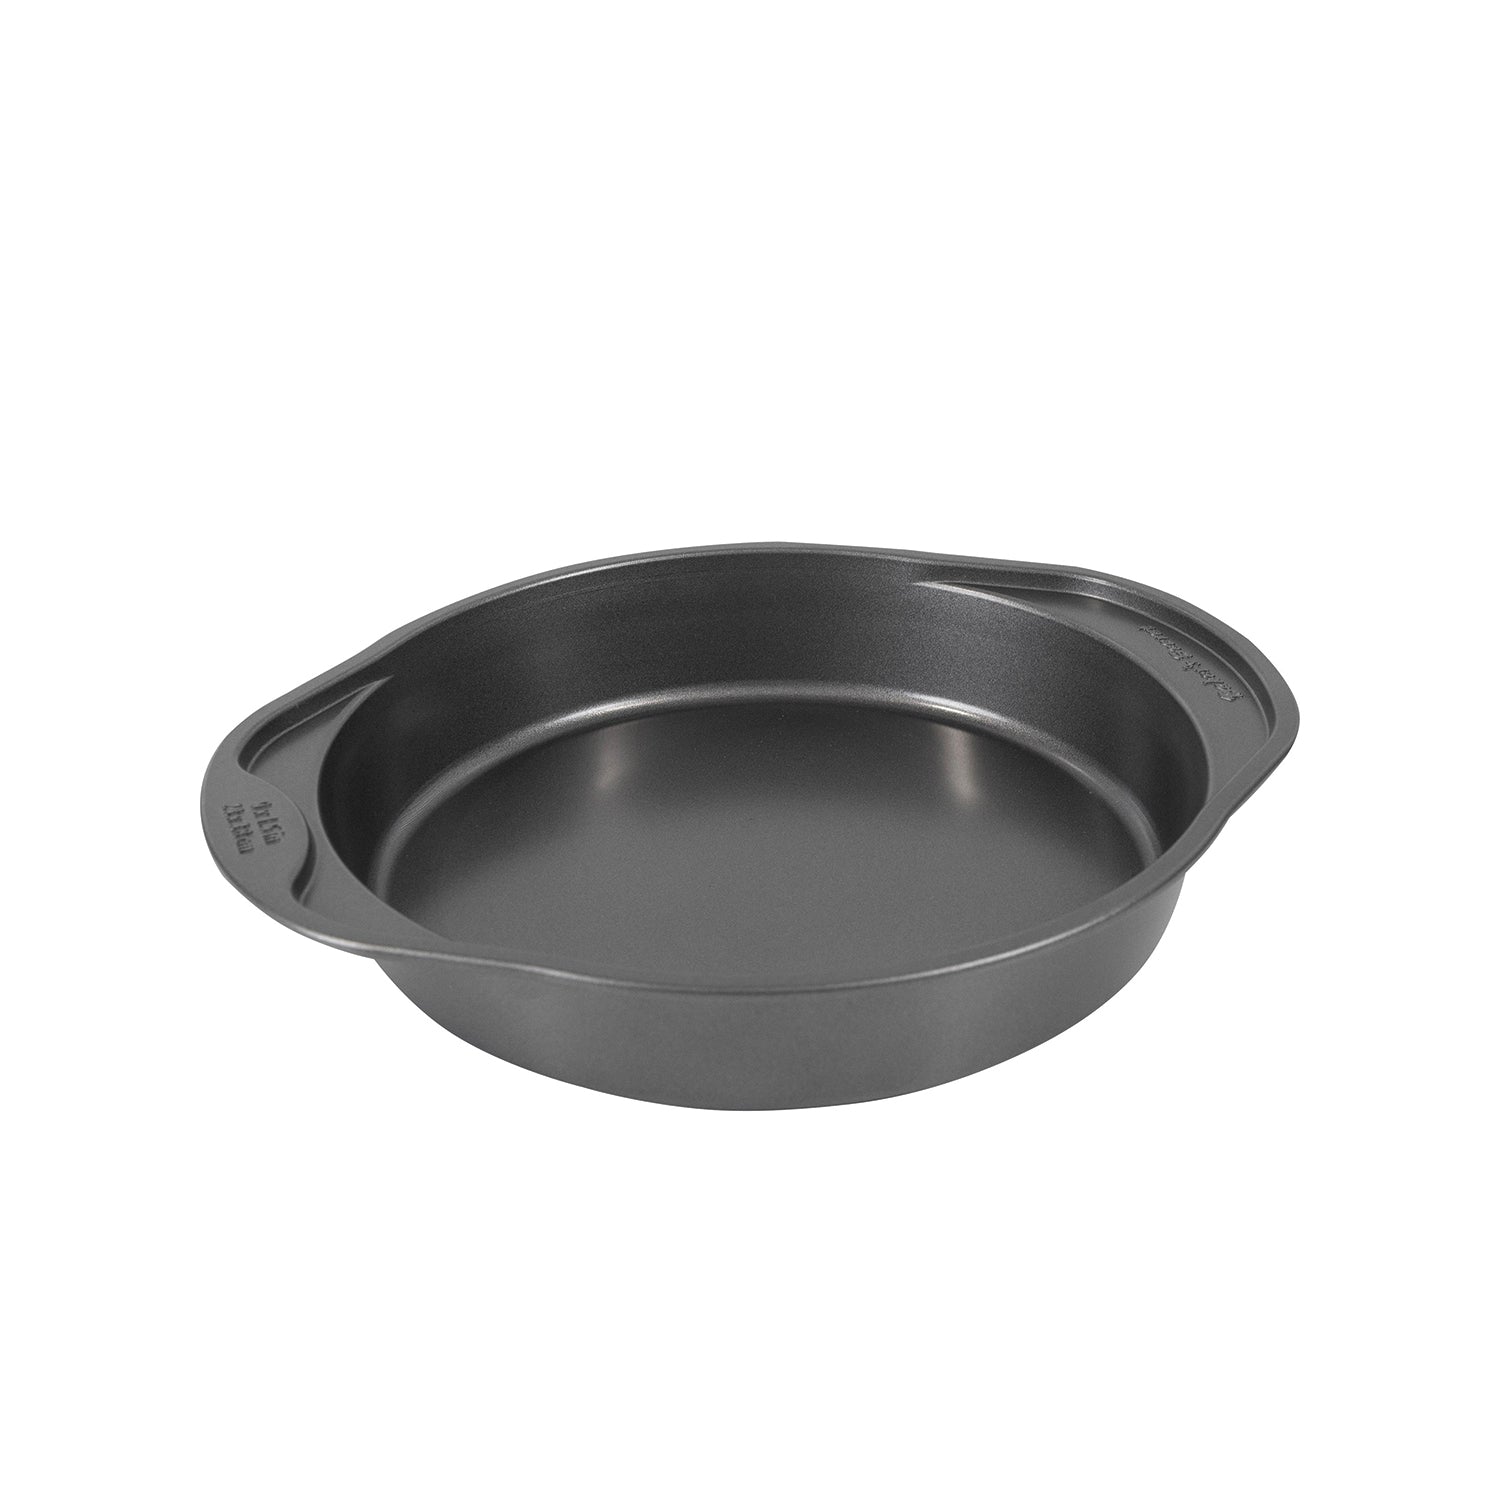 Buy Nonstick Cake Pan - Round Shape - 7.5 inch online in India at best price